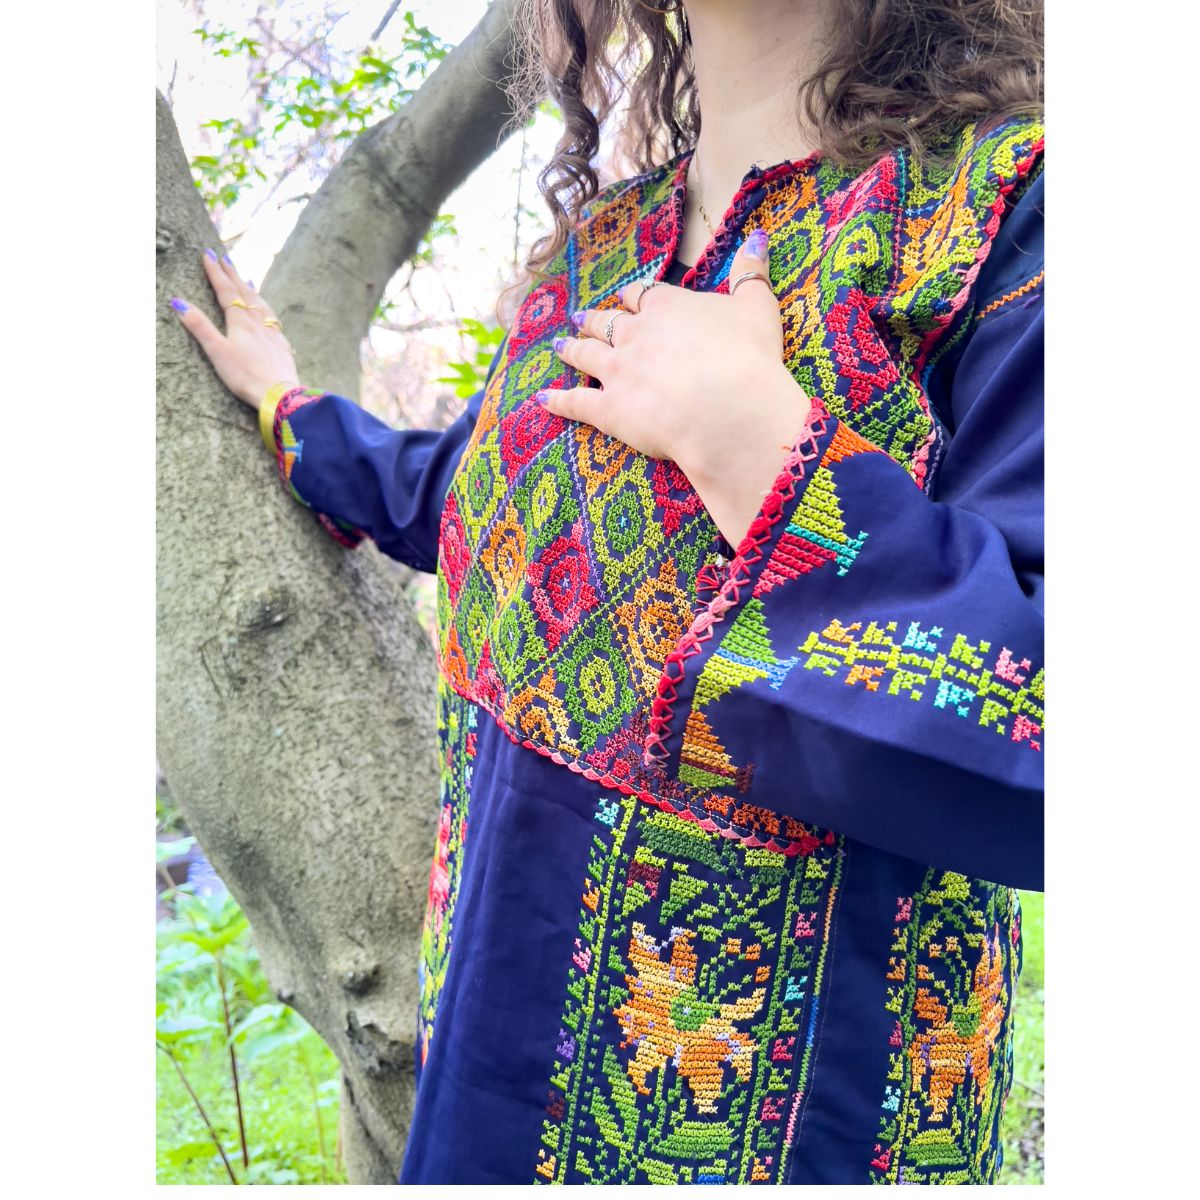 Vintage Embroidered Dress from Palestine